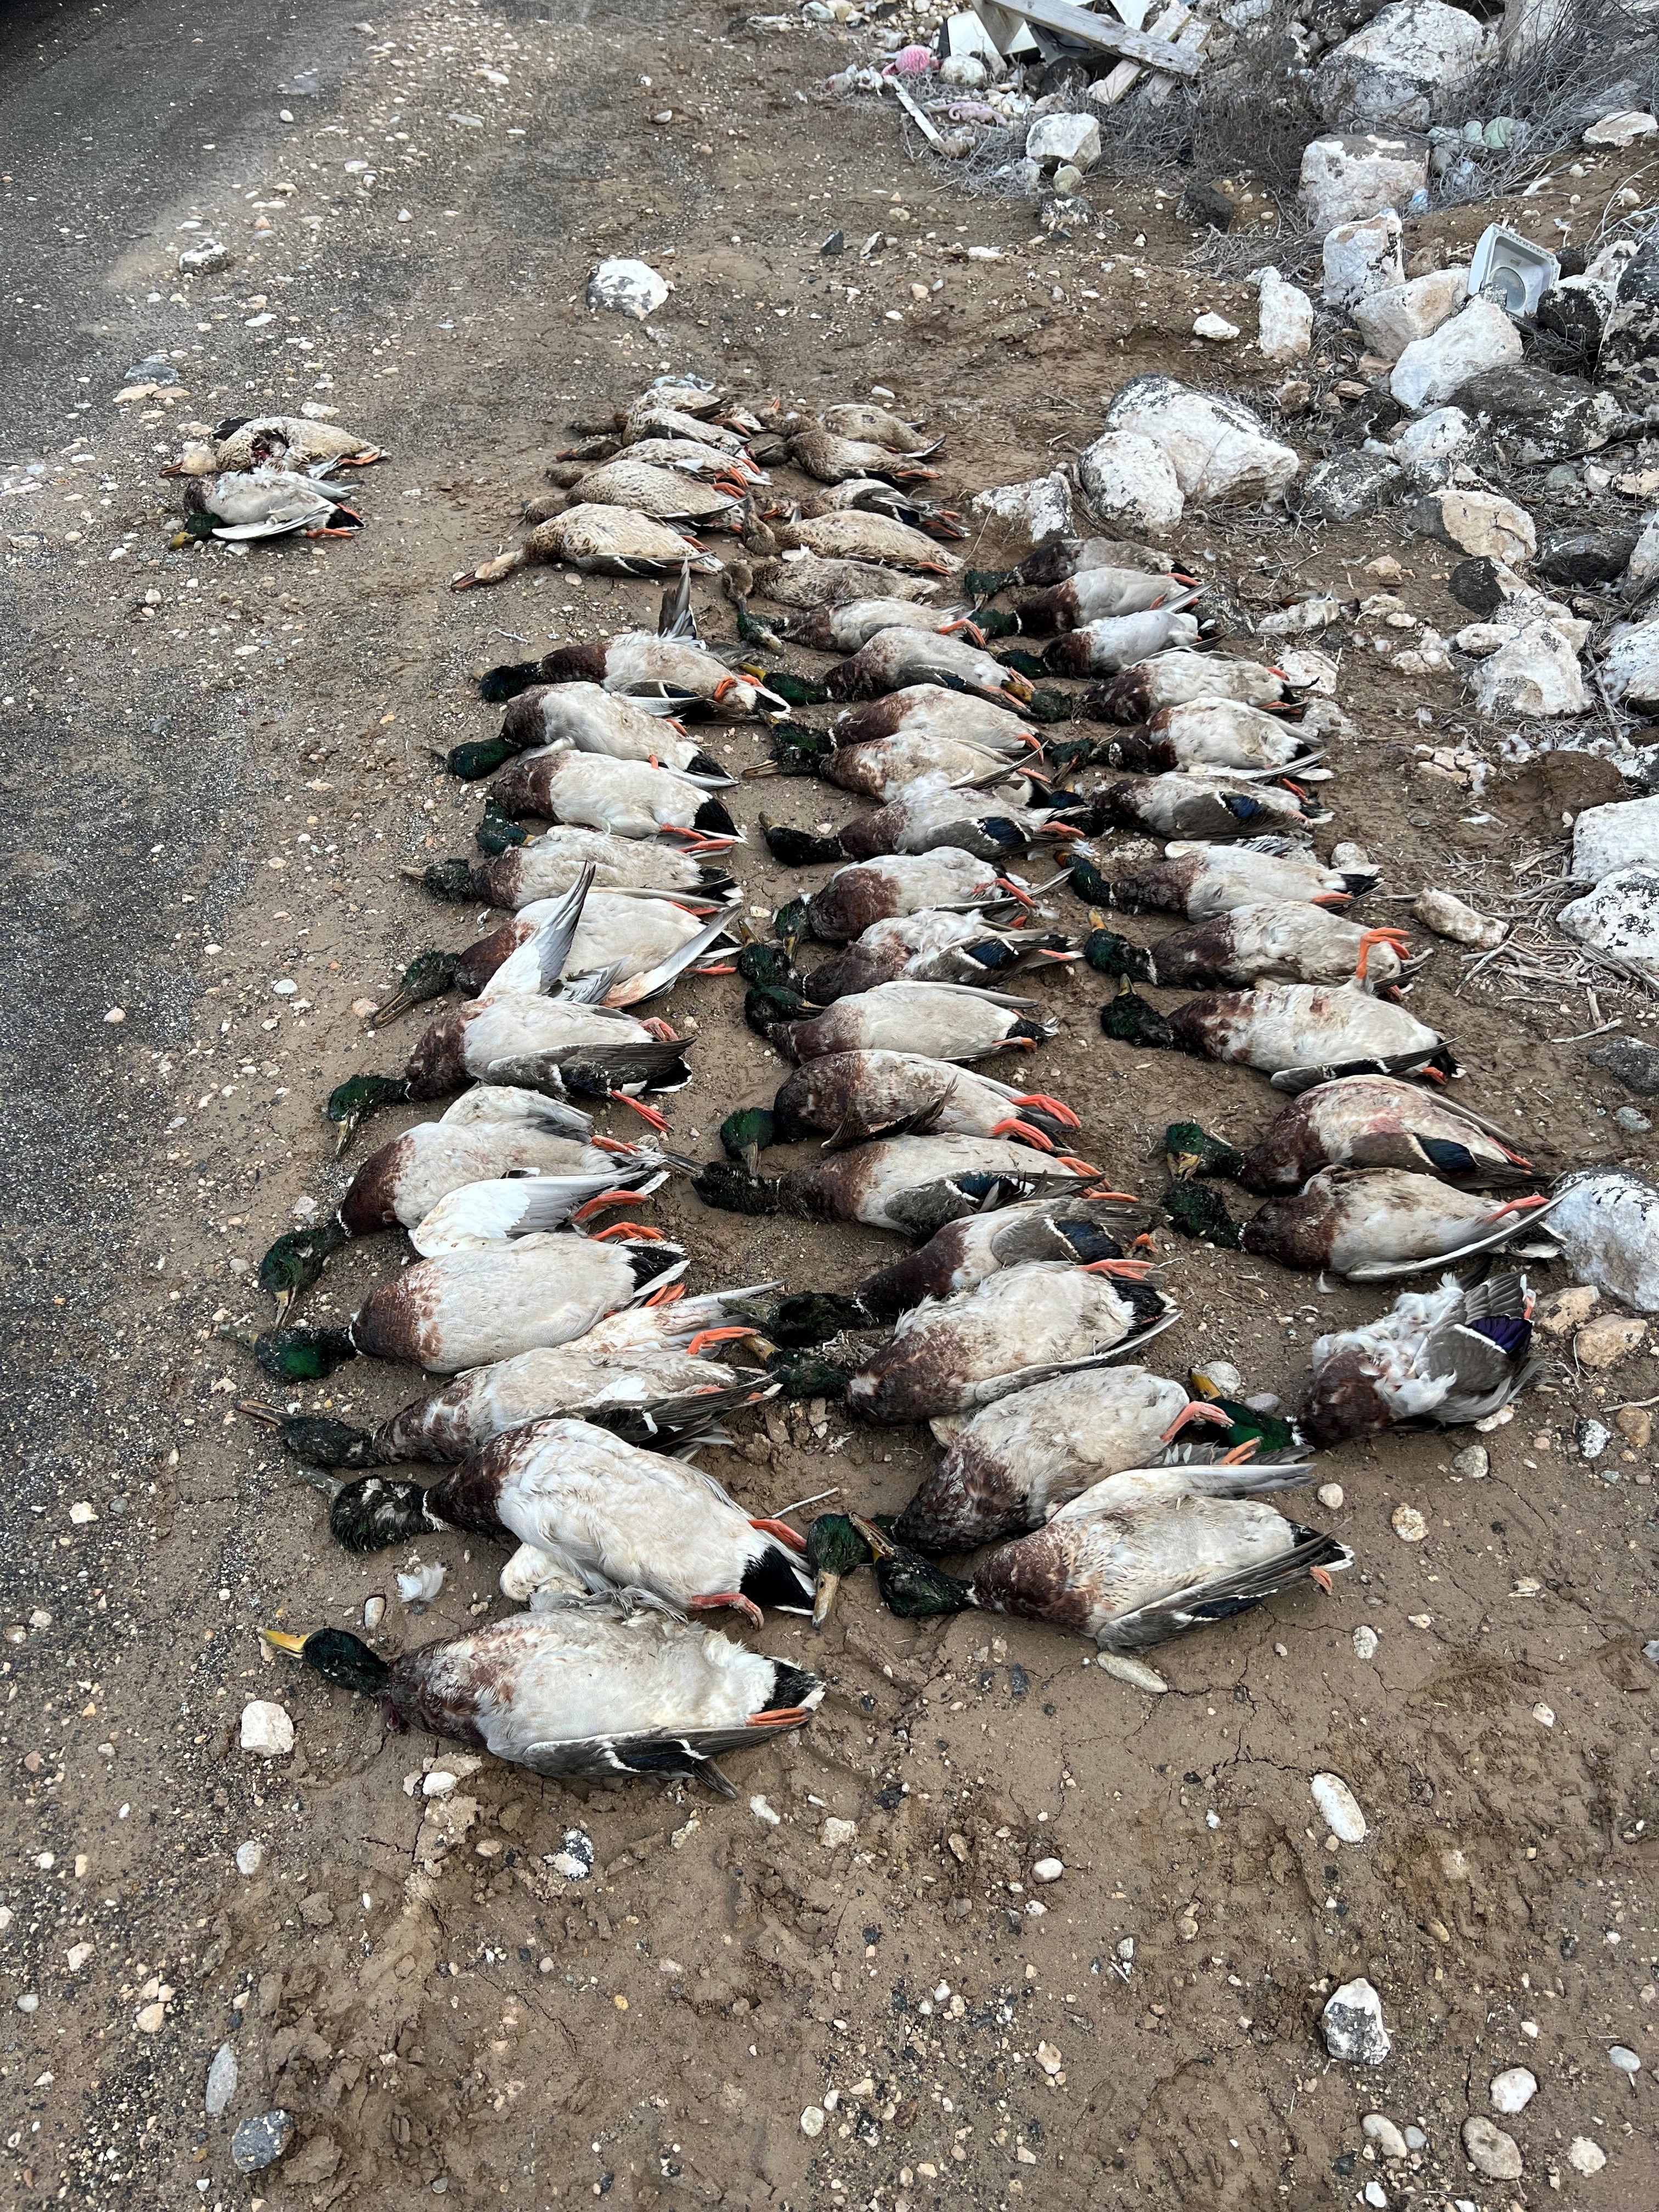 Seven limits of ducks that were shot and left to waste in Canyon County